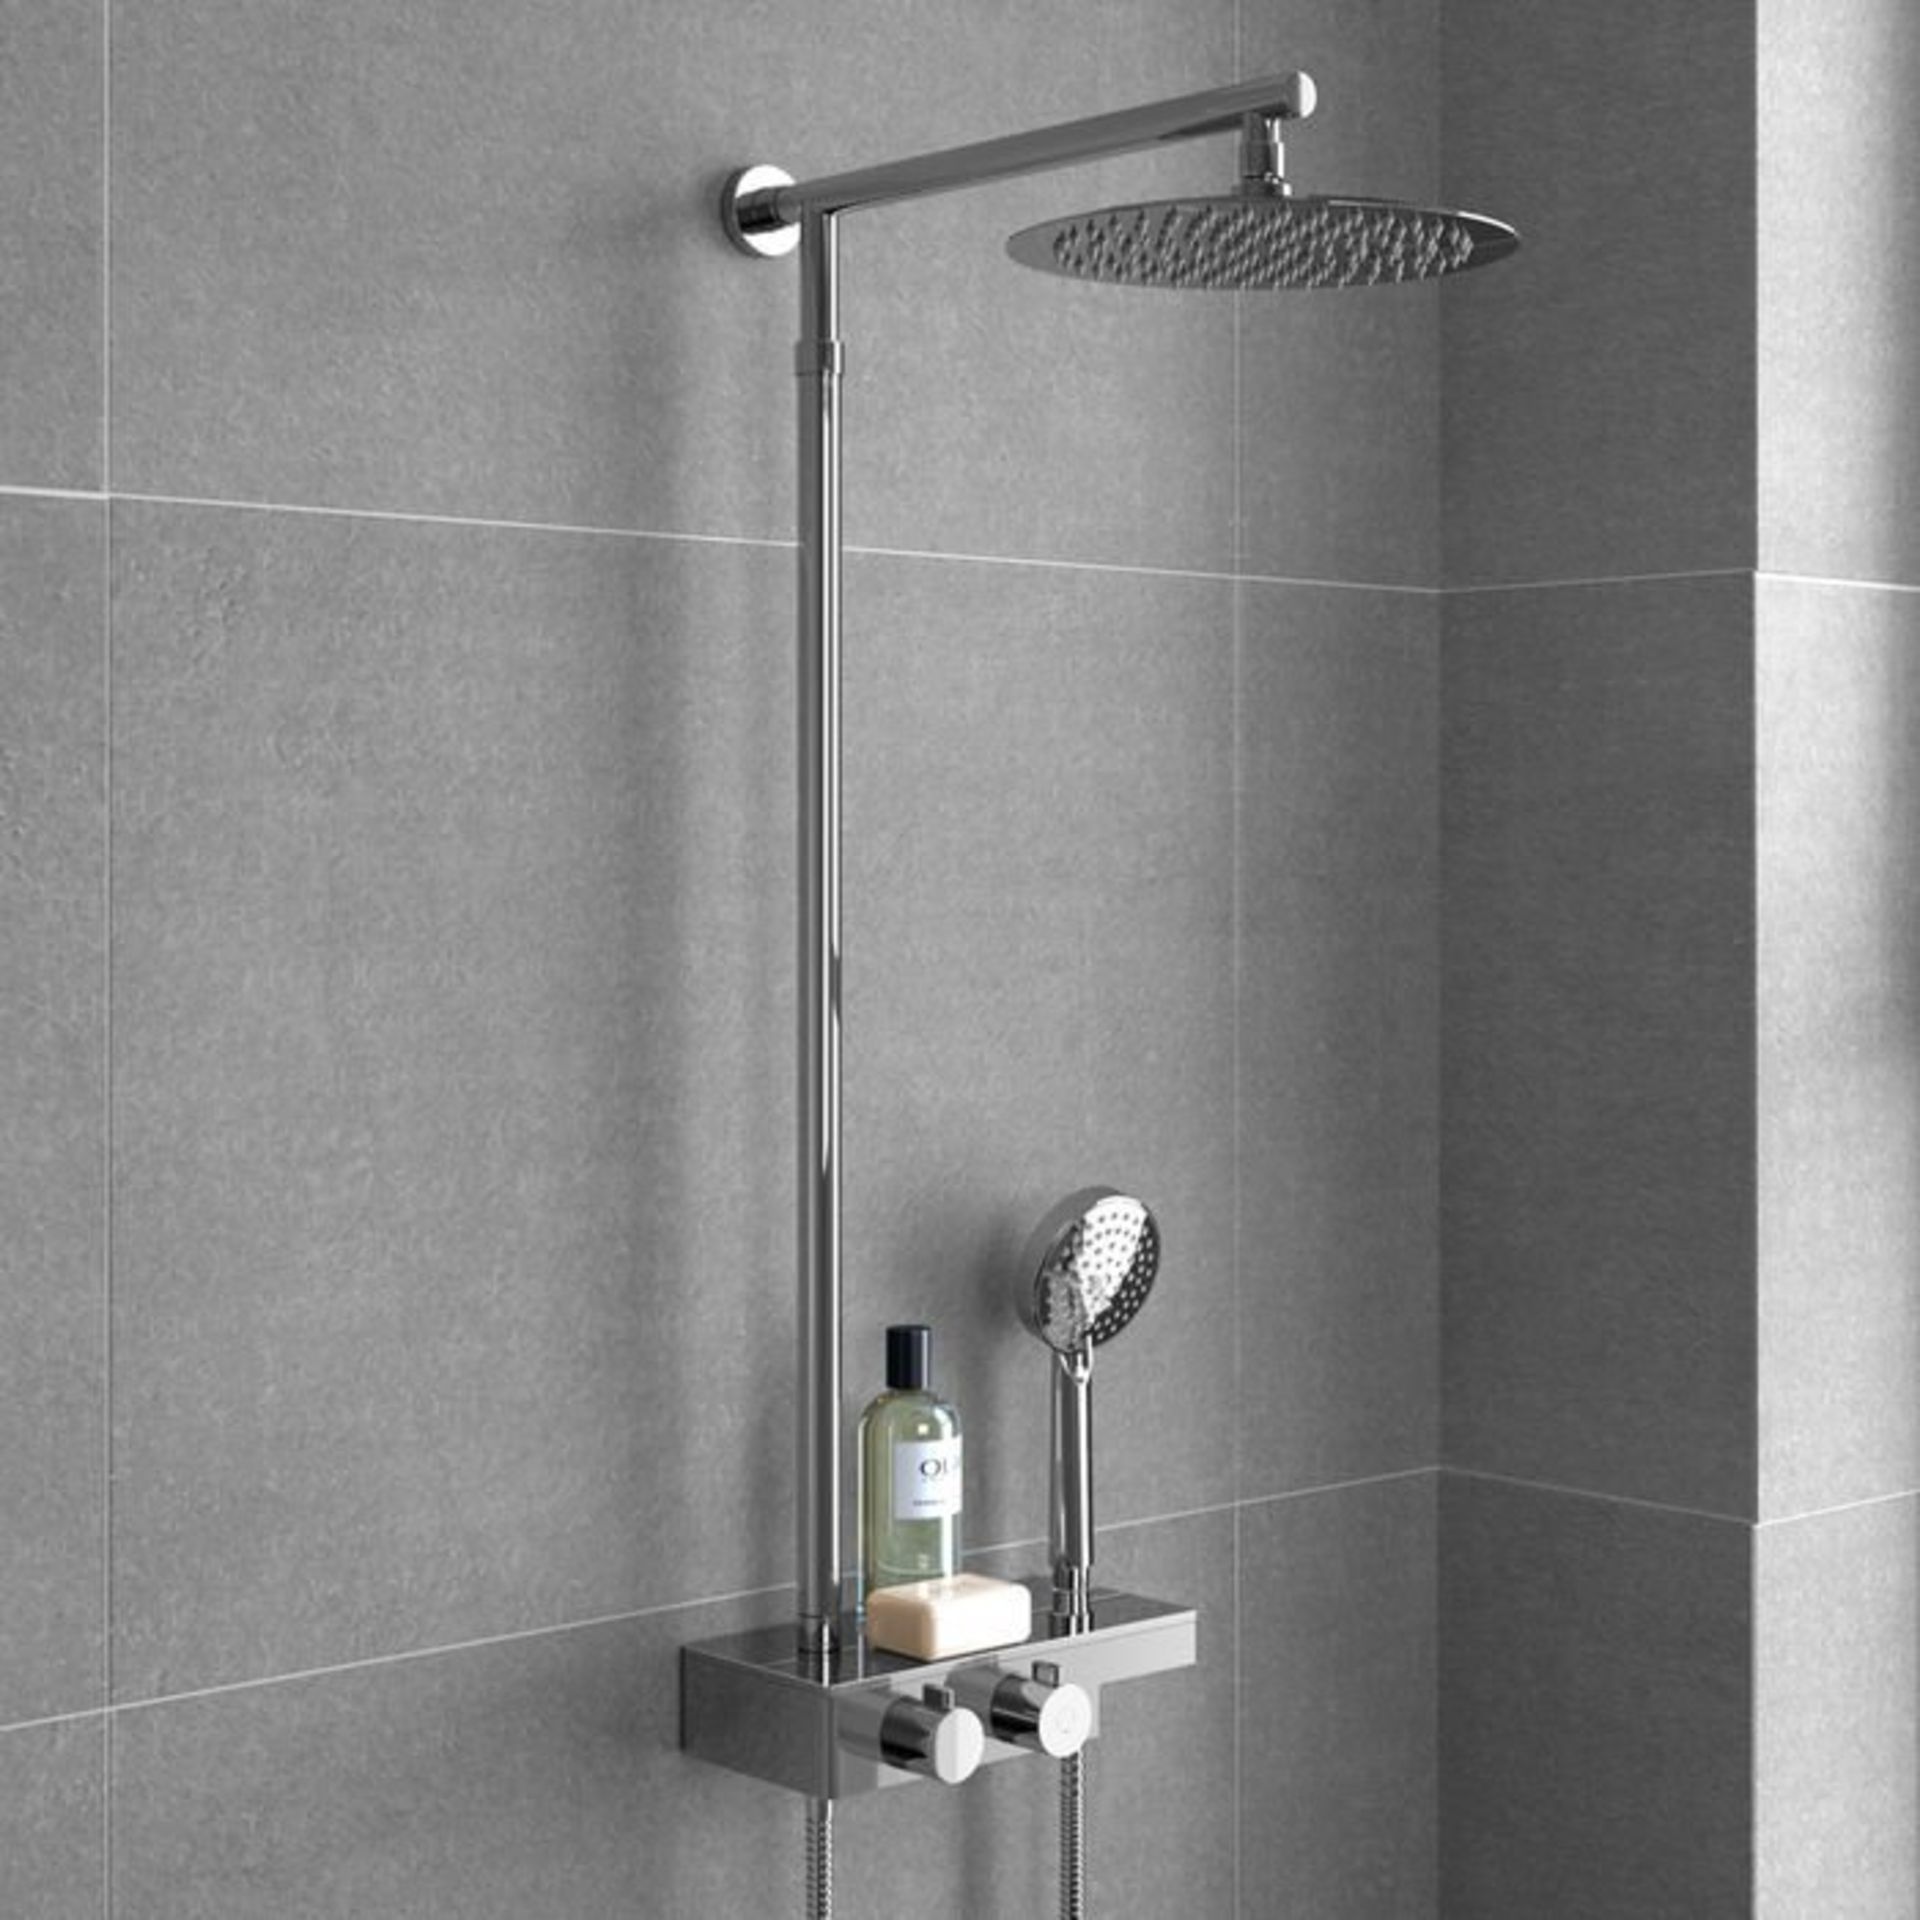 (Y8) Round Exposed Thermostatic Mixer Shower Kit Large Head. Cool to touch shower for additional - Image 2 of 2